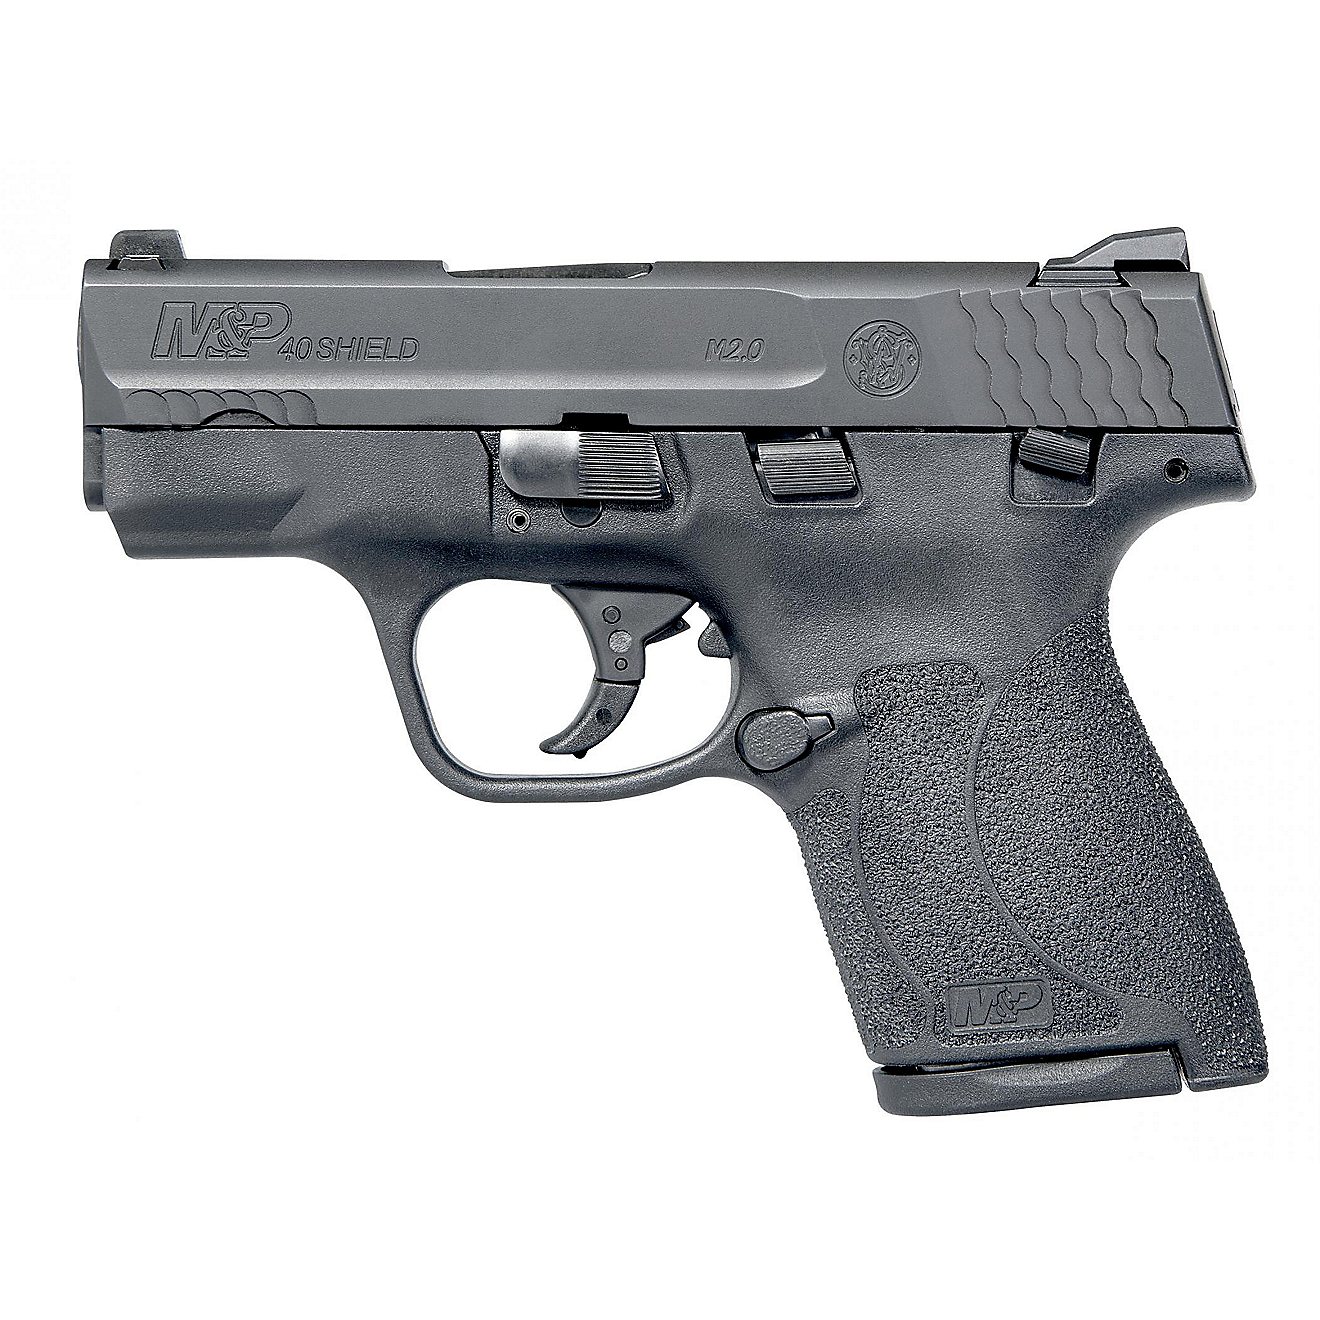 Smith & Wesson M&P40 ShieldM2.0 40 S&W Compact 7-Round Pistol                                                                    - view number 2